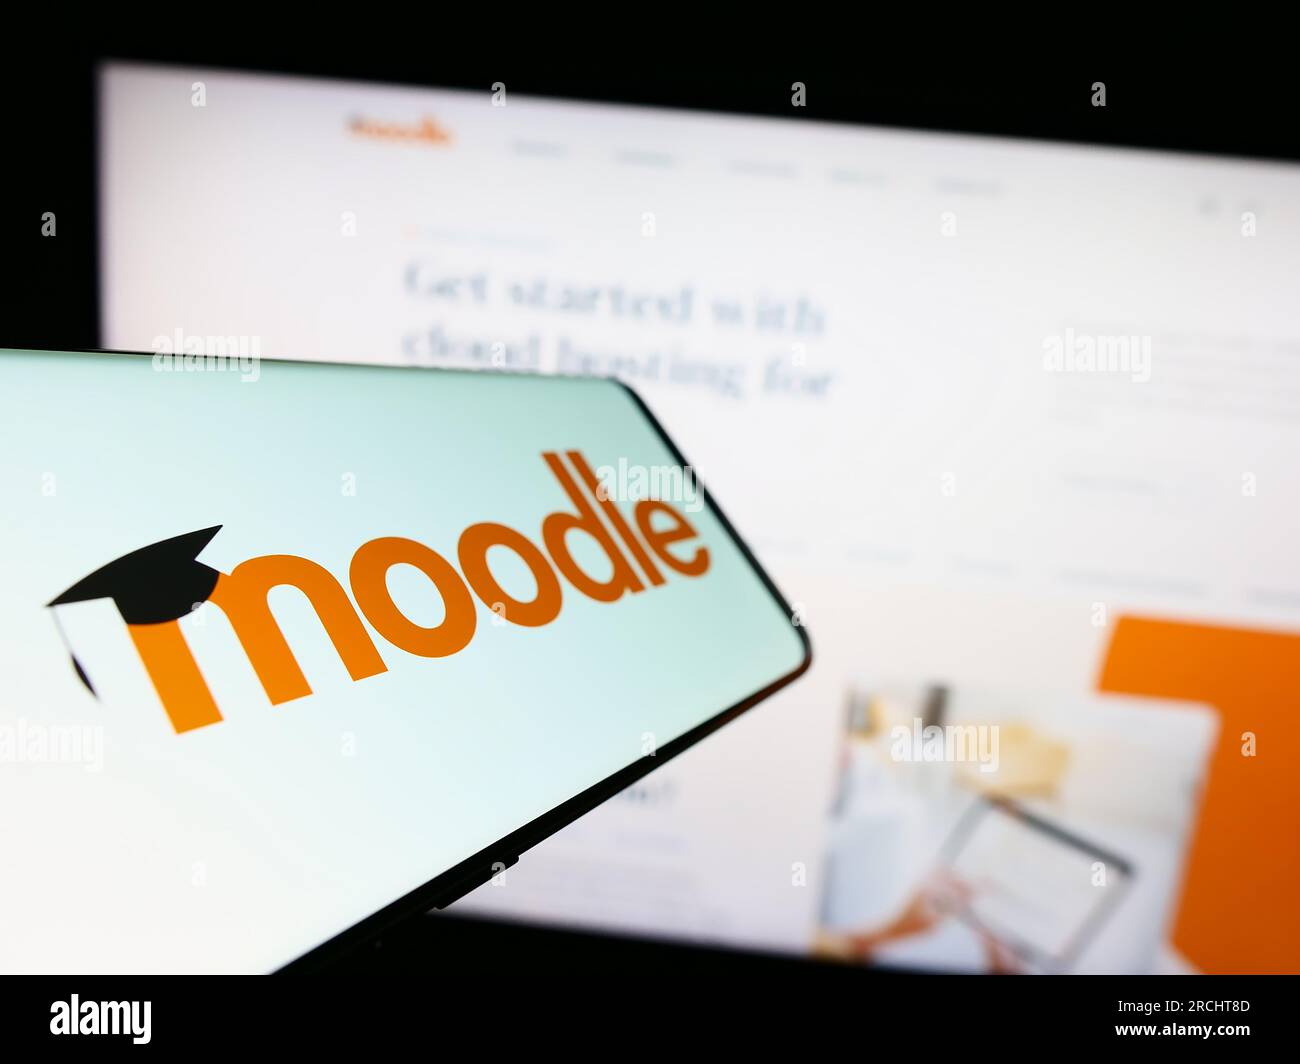 Mobile phone with logo of learning platform Moodle on screen in front of website. Focus on center-left of phone display. Stock Photo